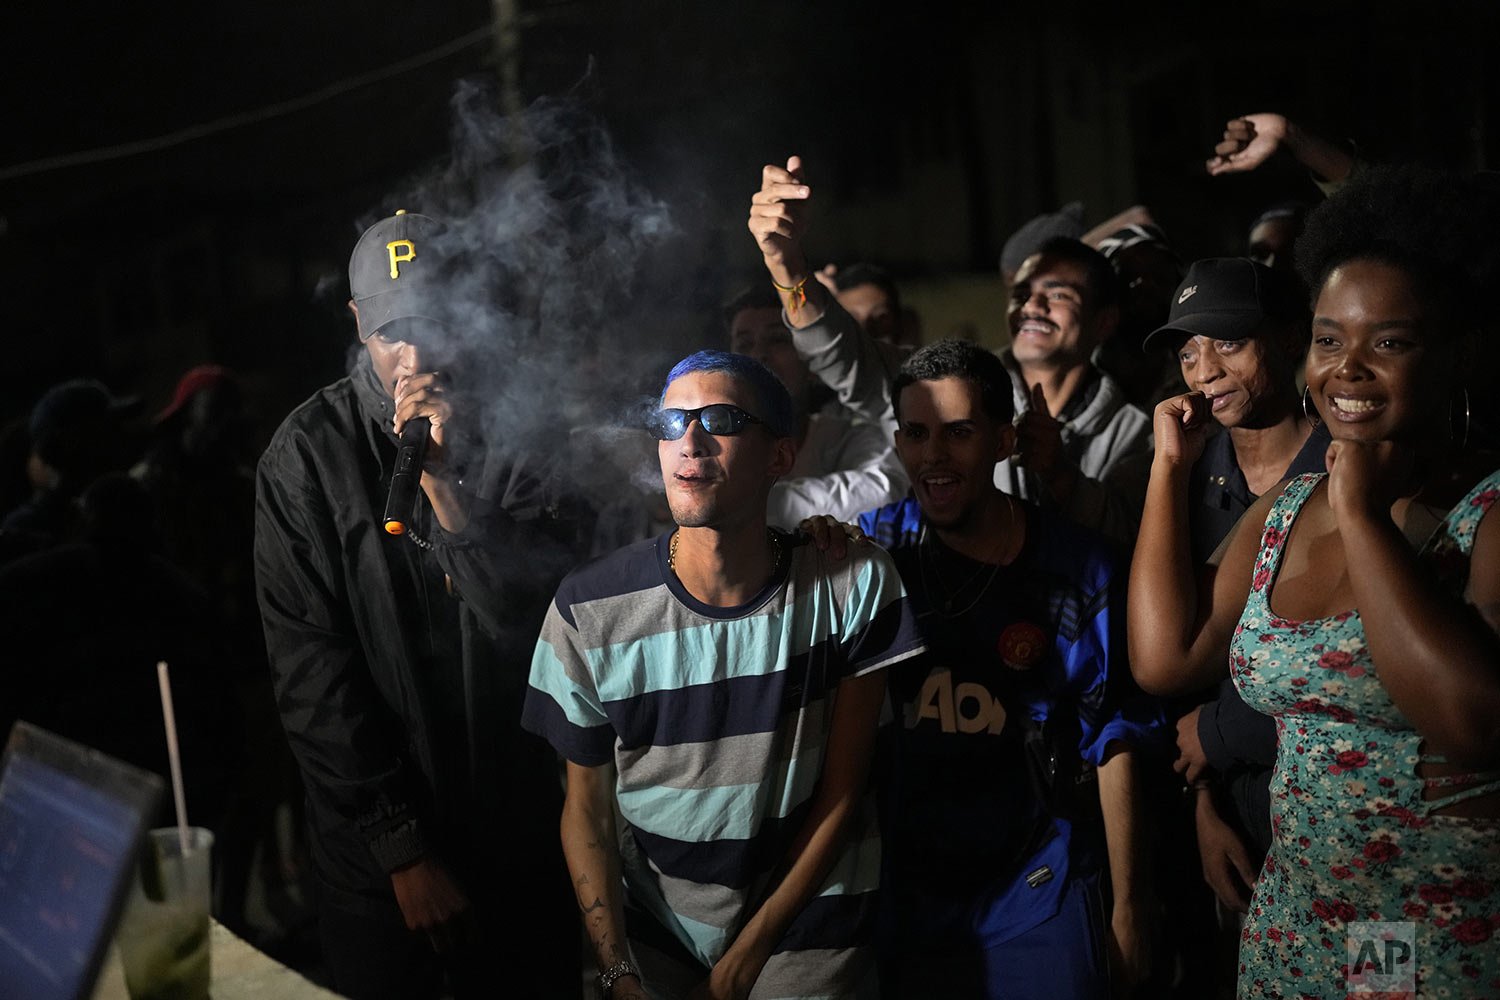  Rap artist Kunk, center, listens to a competitor at the Gas Battle rapping competition outside a bar in the City of God favela of Rio de Janeiro, Brazil, Nov. 10, 2021. (AP Photo/Silvia Izquierdo) 